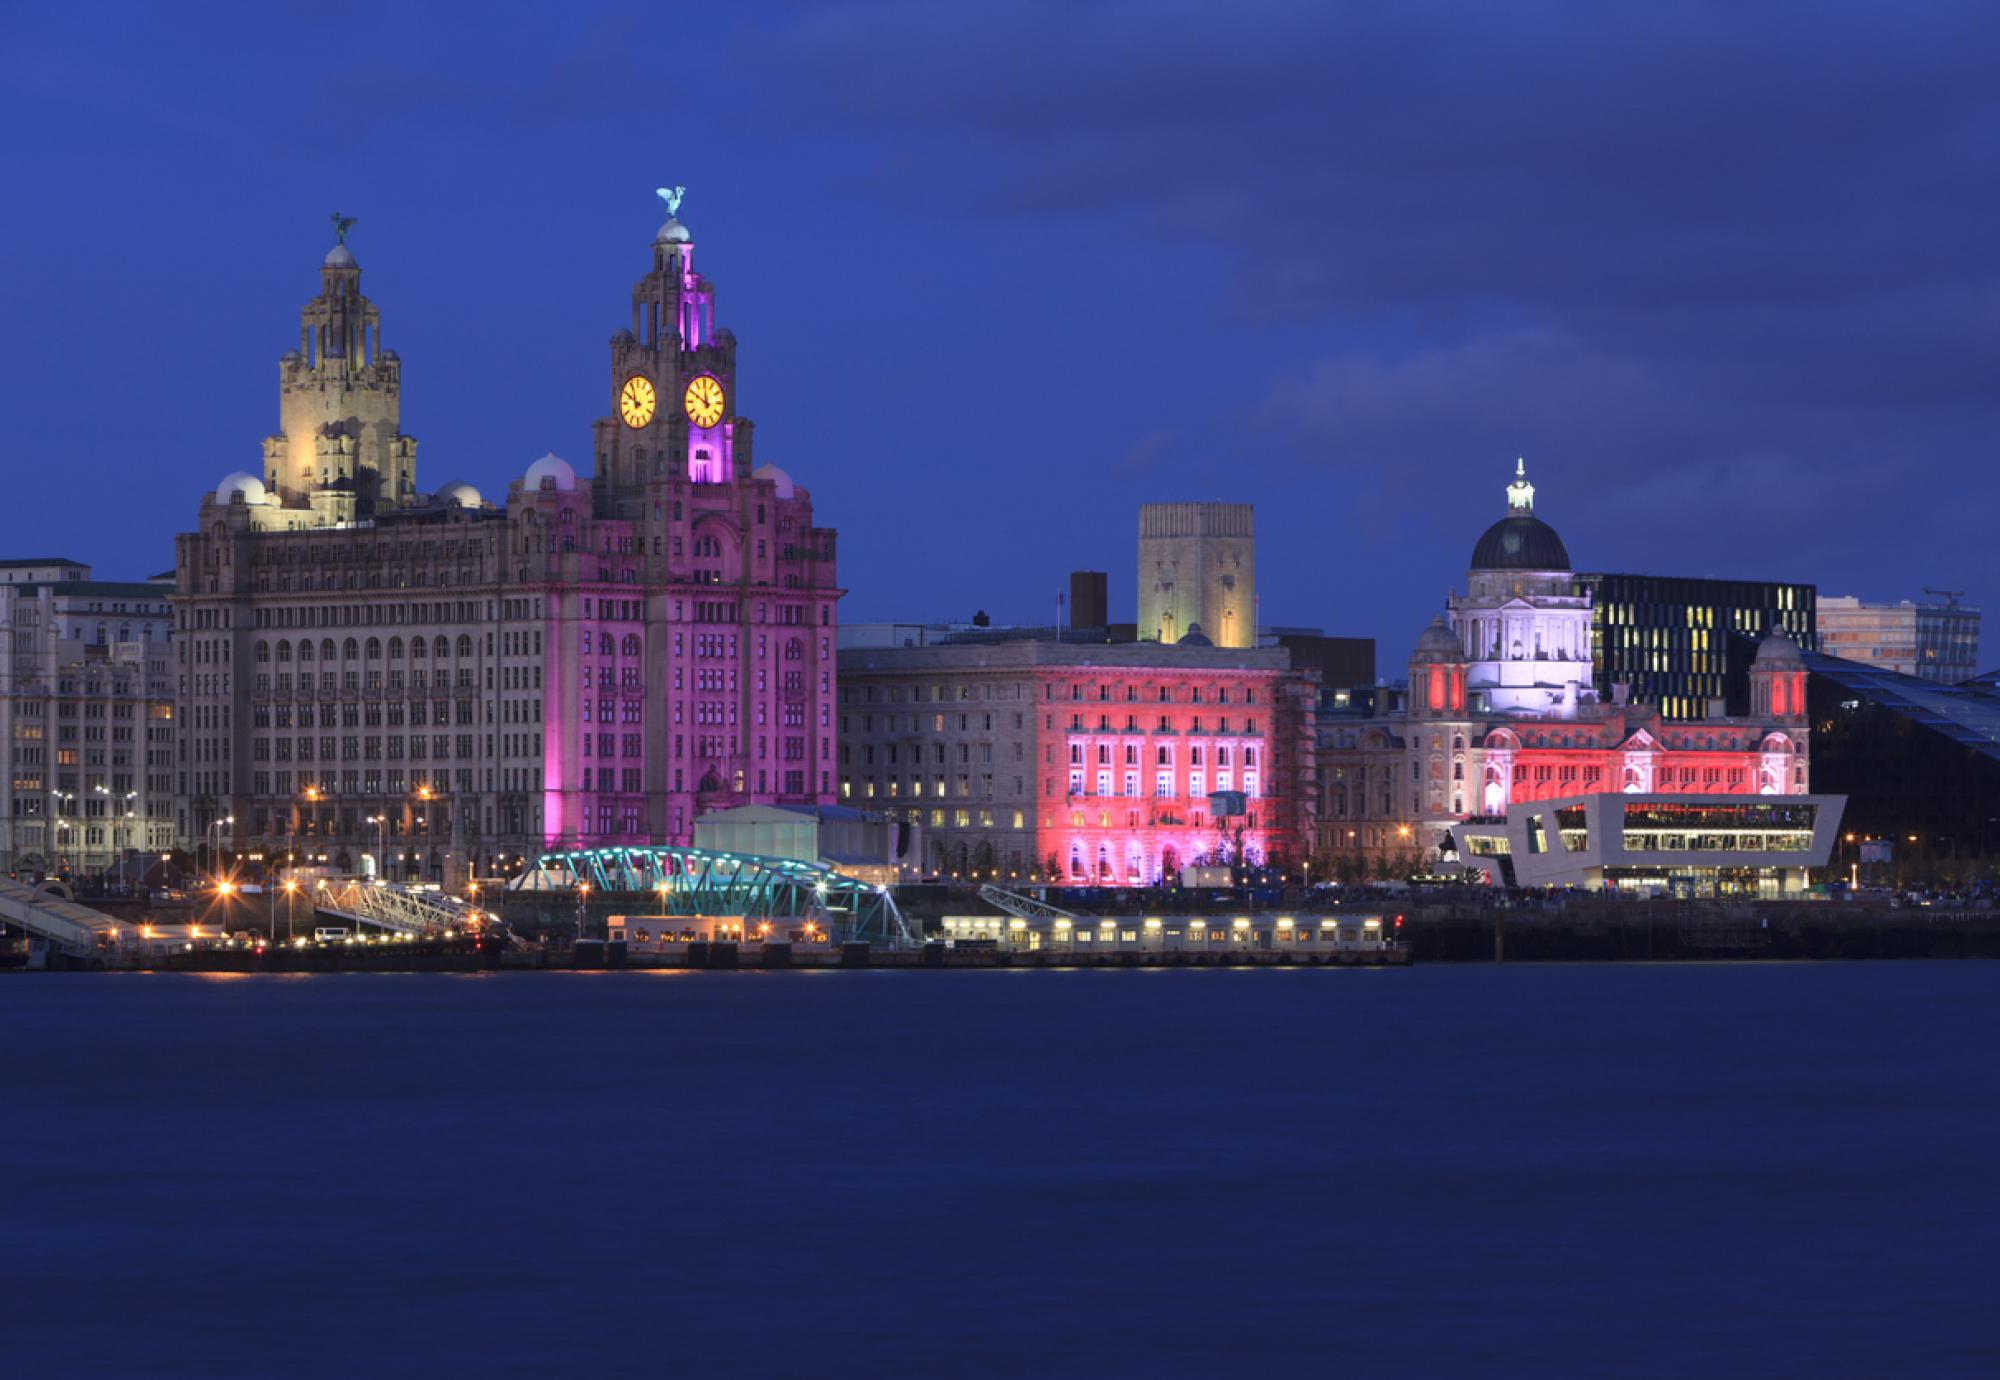 Liverpool at night with the Liver building lit